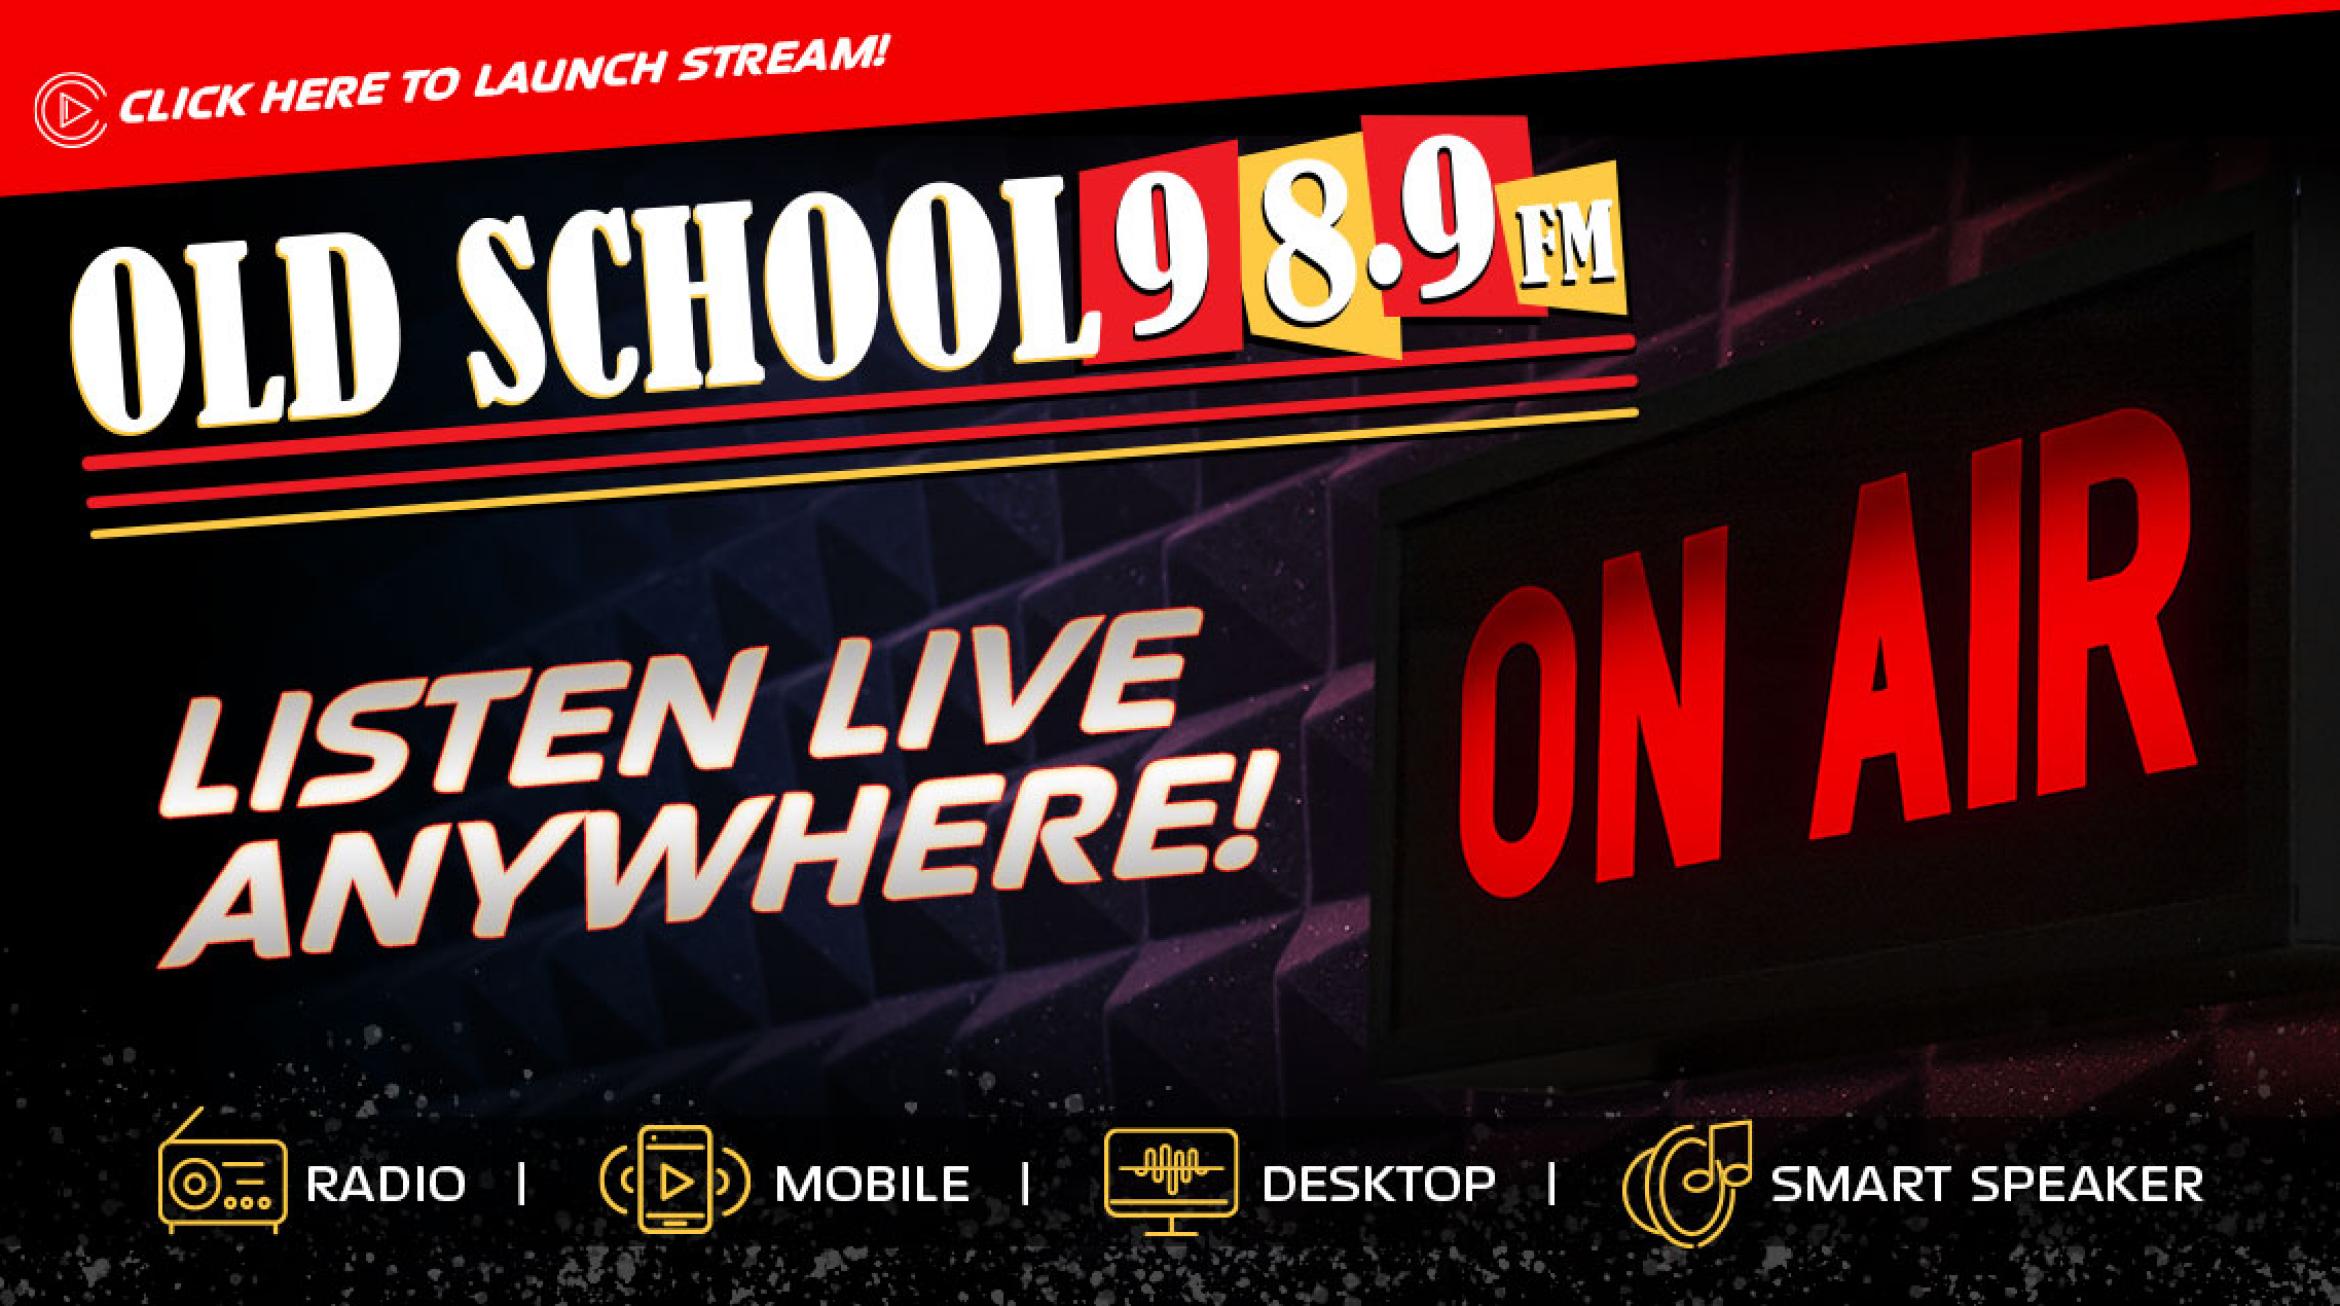 1140x635 ListenLive Anywhere Oldschool 989